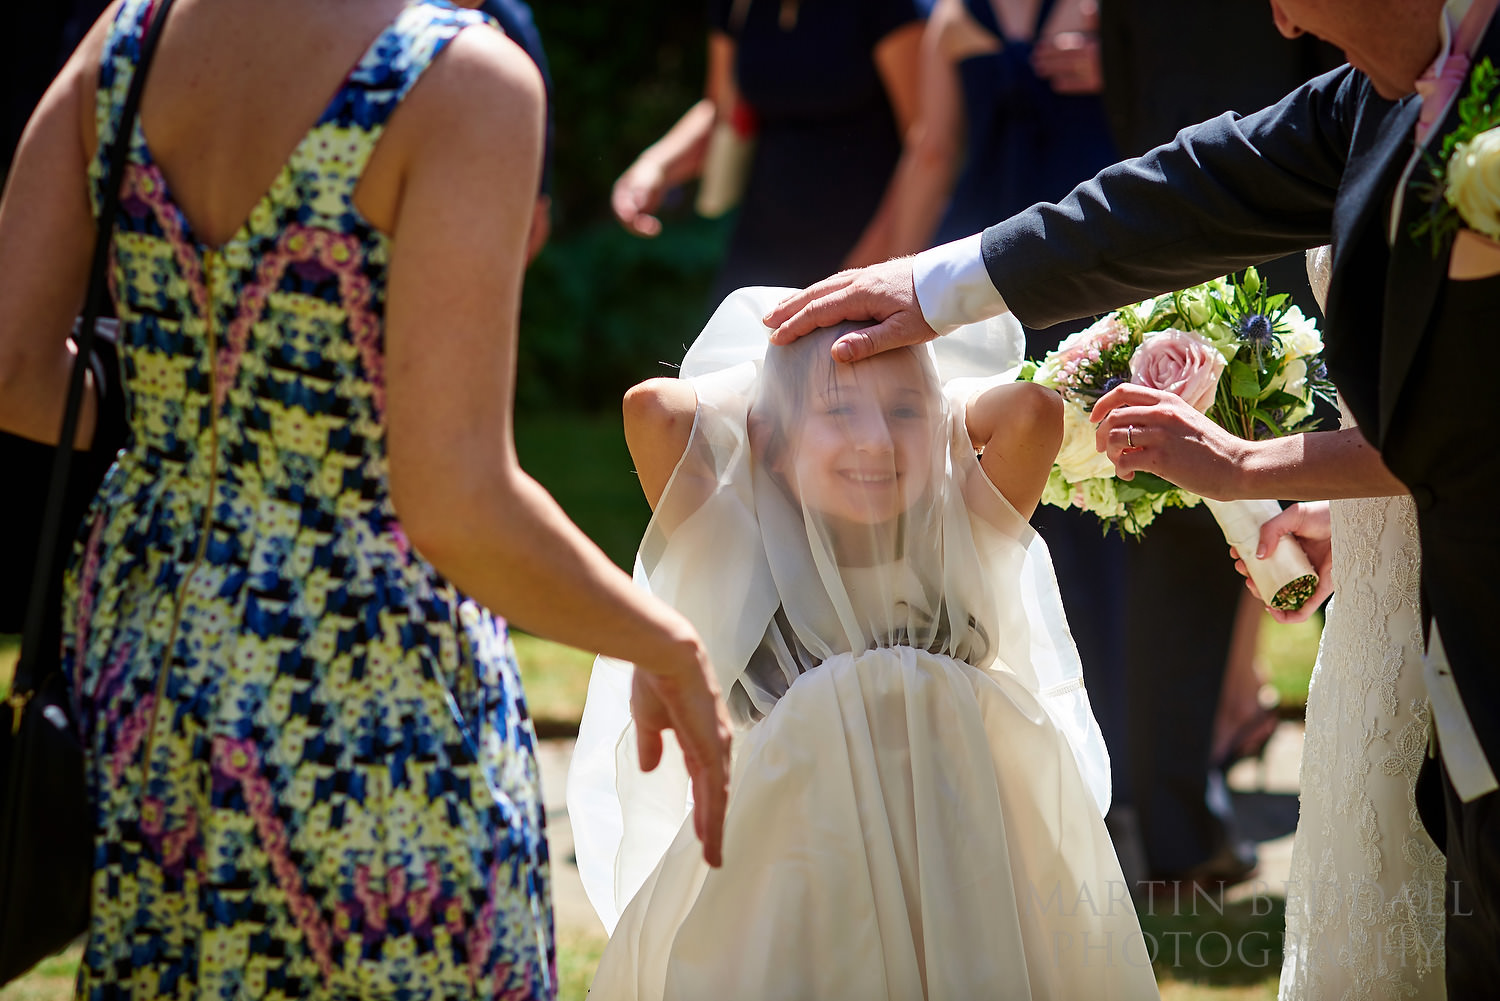 Flower girl playing with the veil